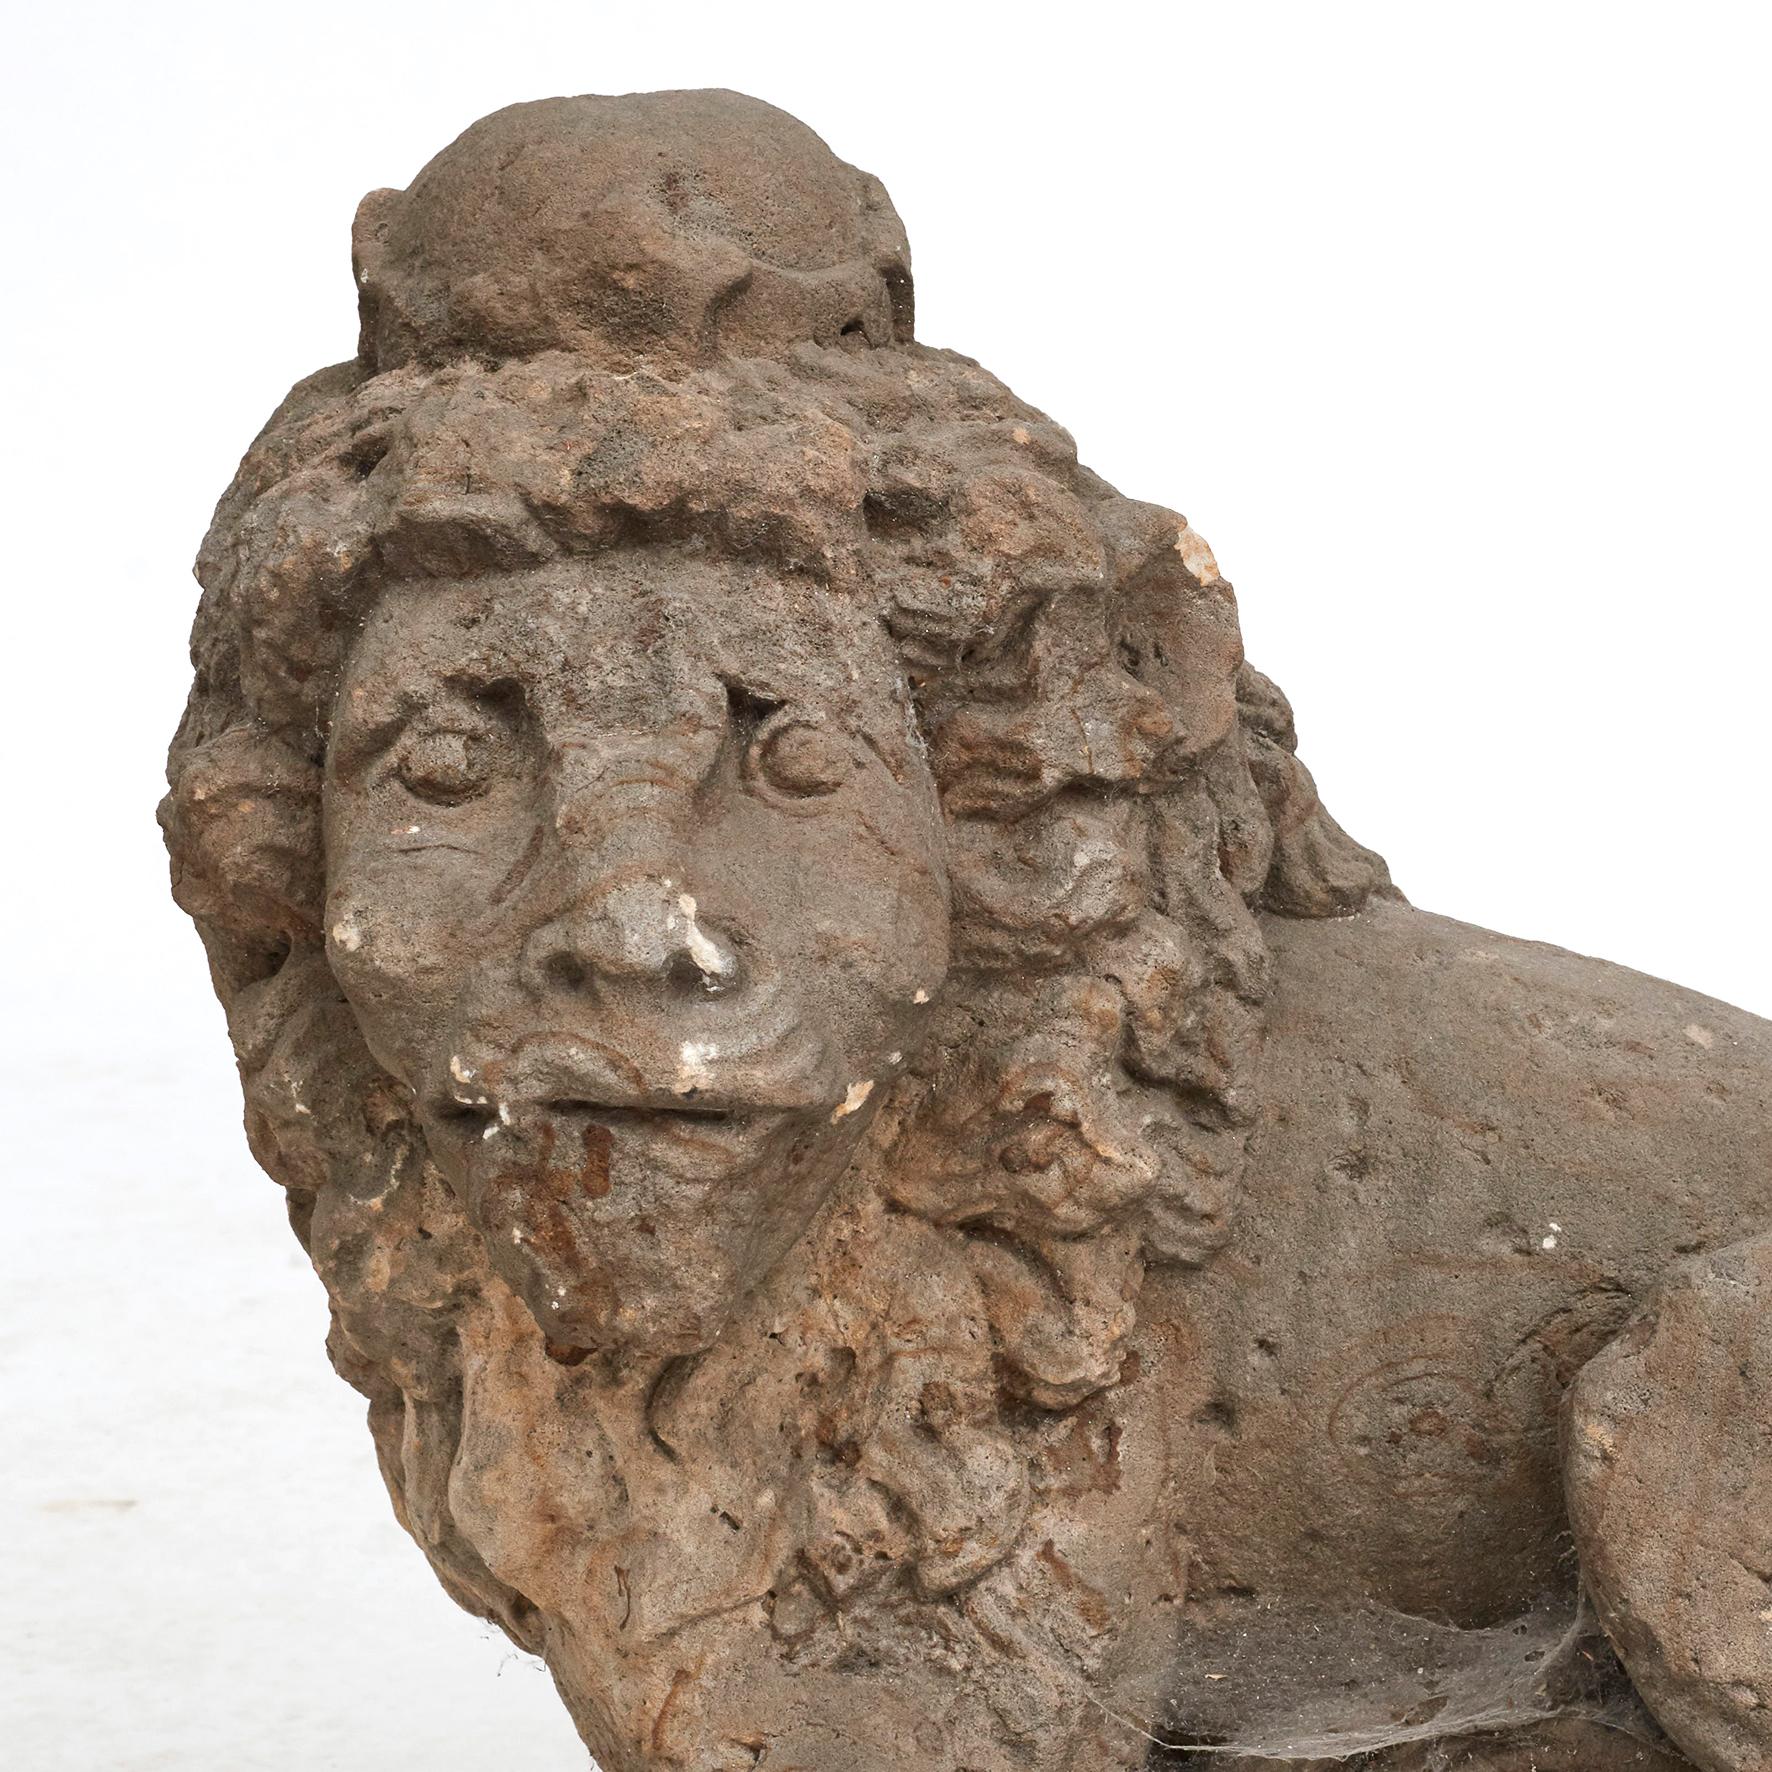 Pair of baroque sandstone lions from a Swedish Manor House 17'th -18'th ctr.
Original untouched condition with age-related wear.

Measures on each : H: 50 / 45 W: 28 / 29 D: 50 / 46 cm.
 